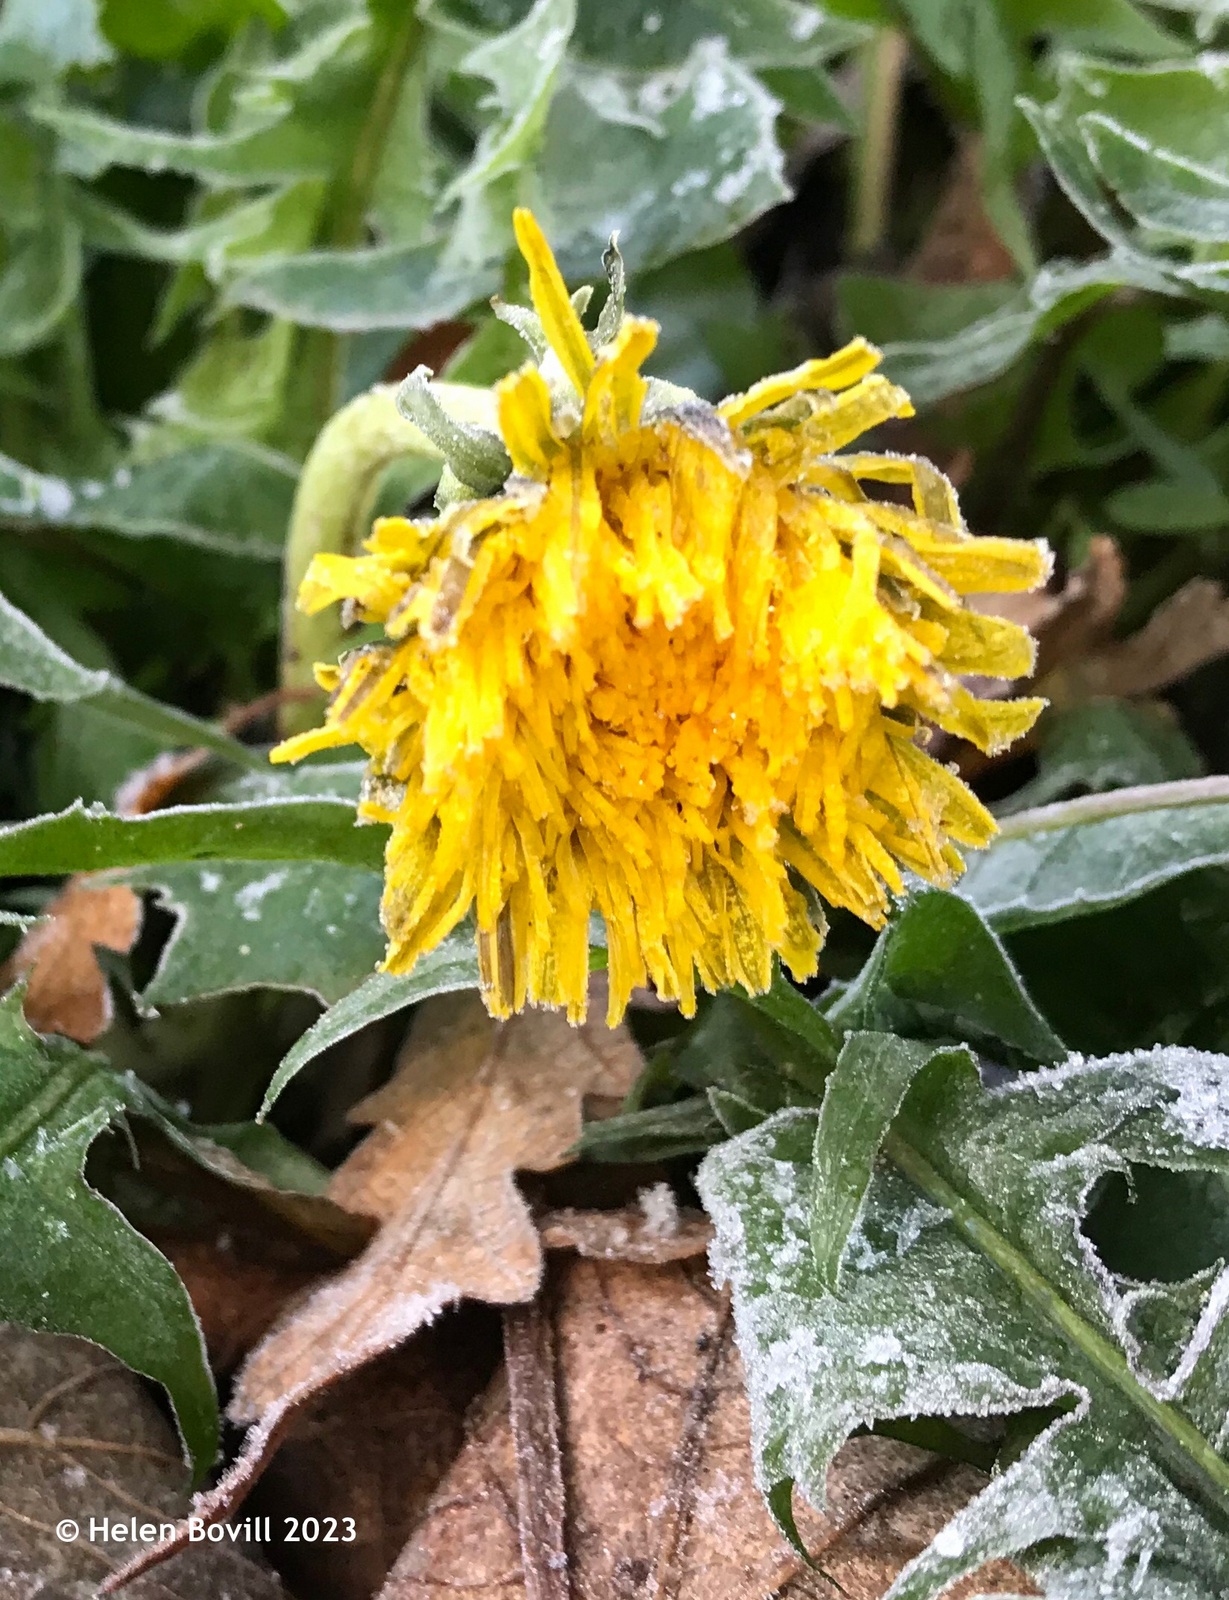 A frost-covered partially opened dandelion